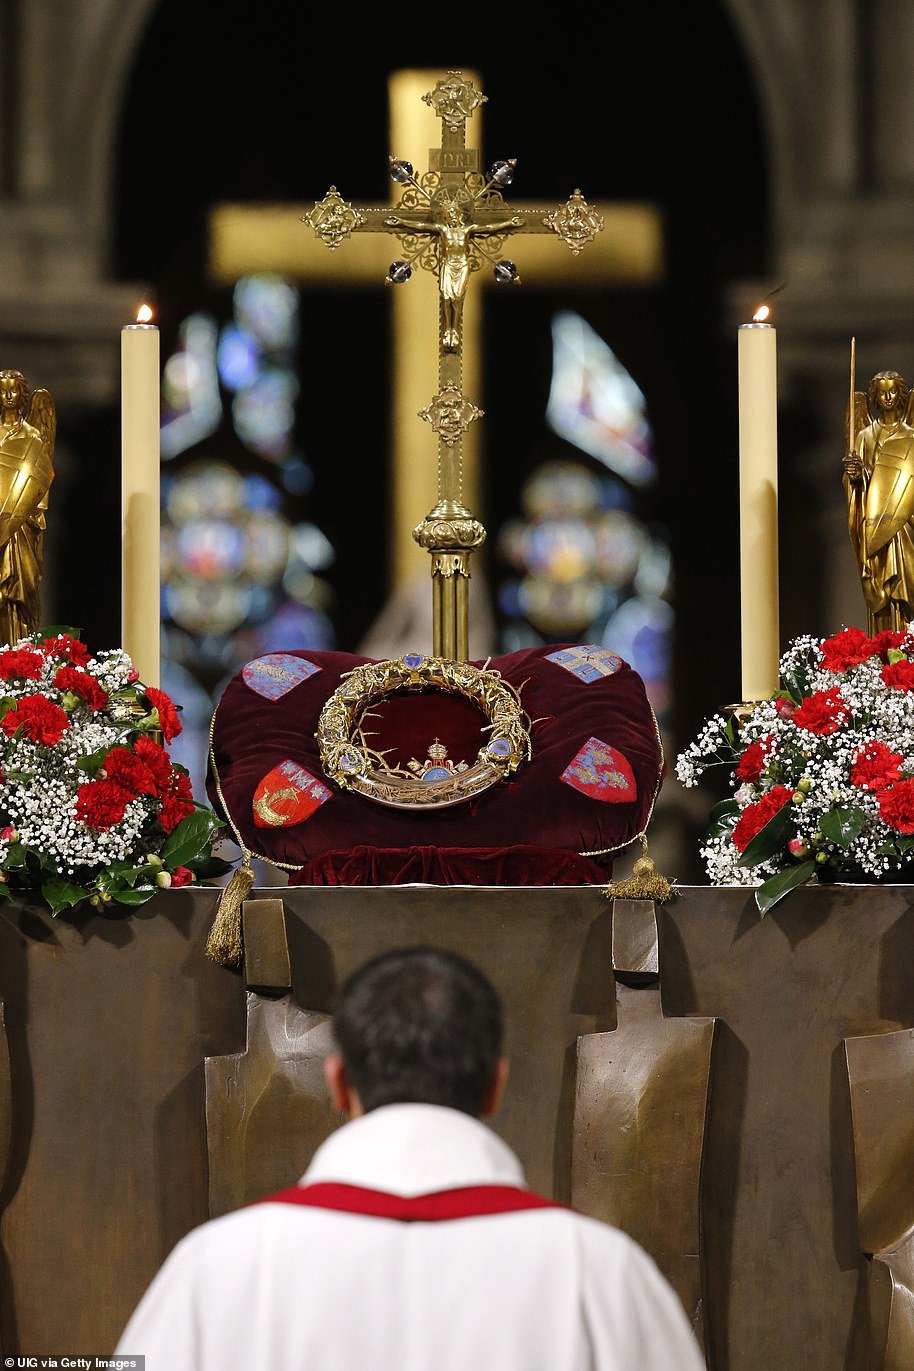 Notre-Dame de Paris is home to the relic that is accepted as a cathedral by Catholics around the world.  The holy crown of thorns worn by Jesus Christ during the Passion